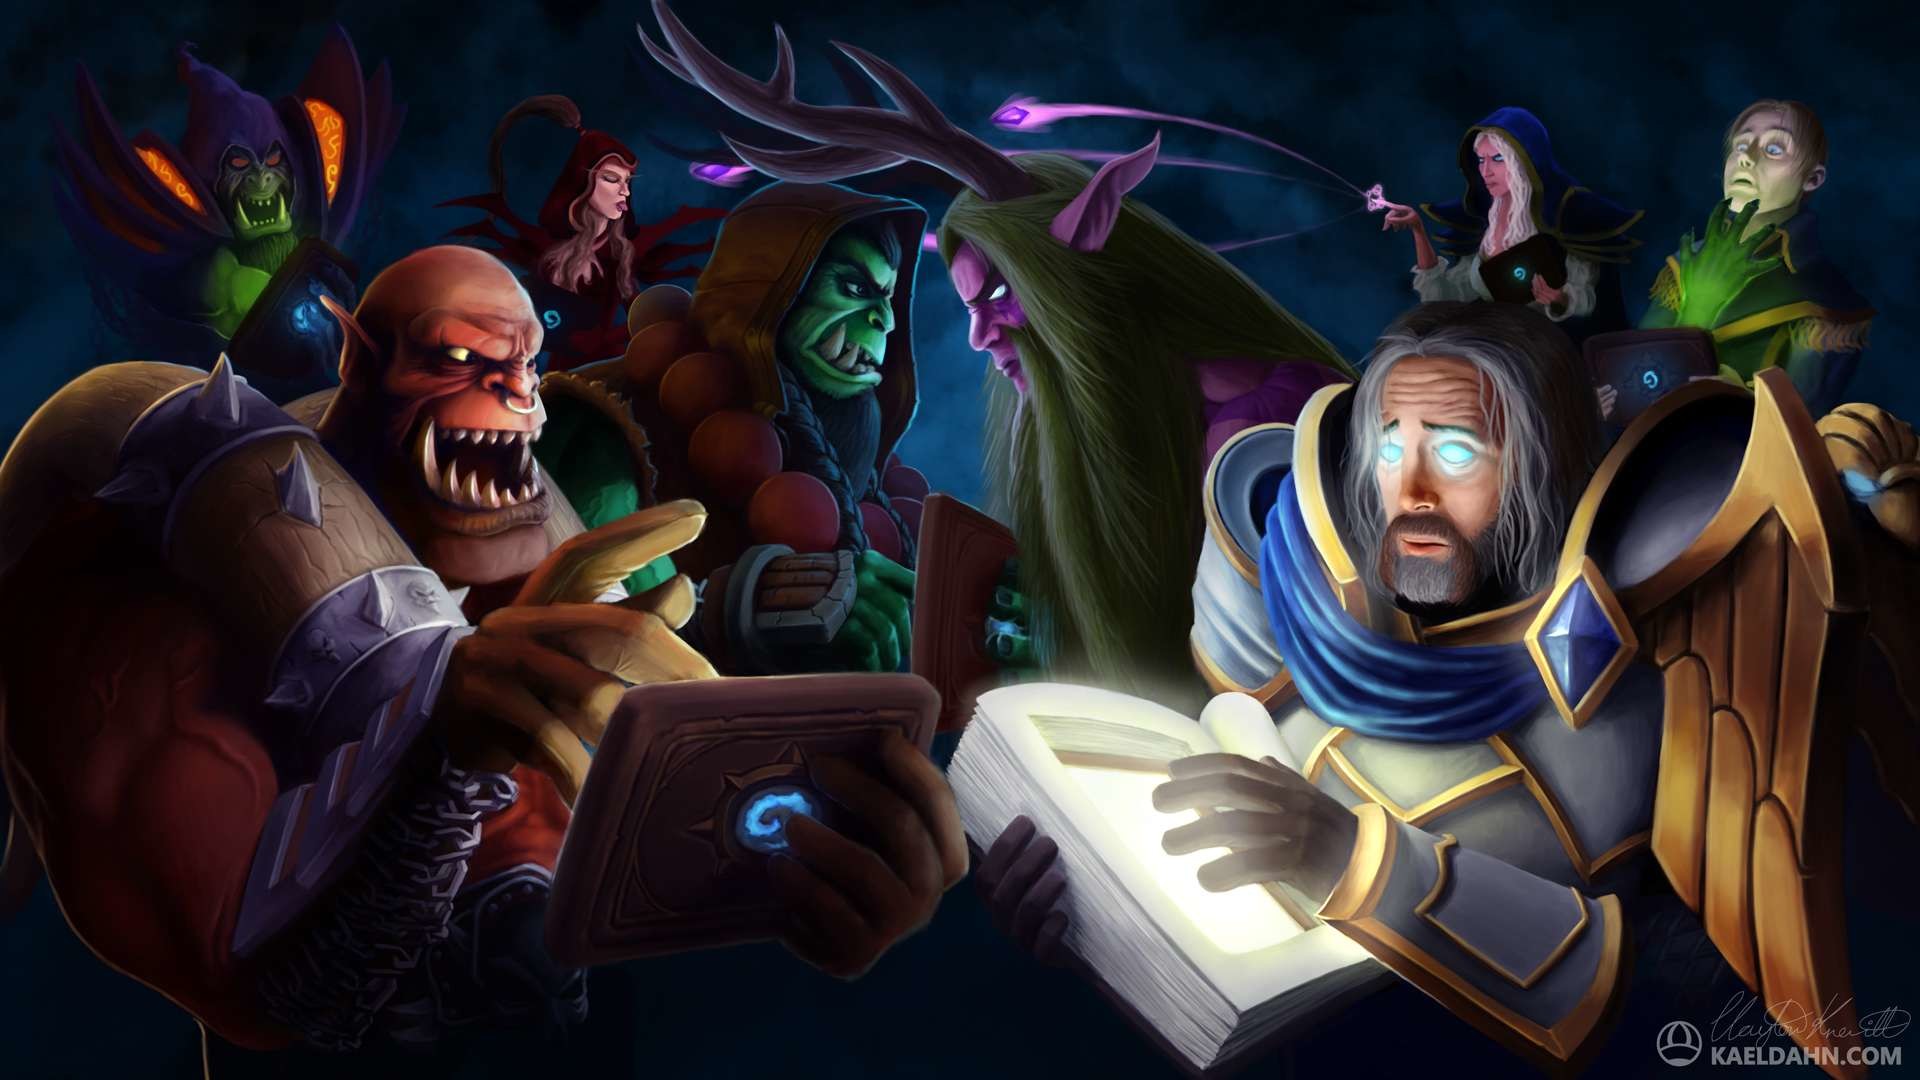 1920x1080 Hearthstone Wallpaper HD Best Collection Of Game Wallpapers